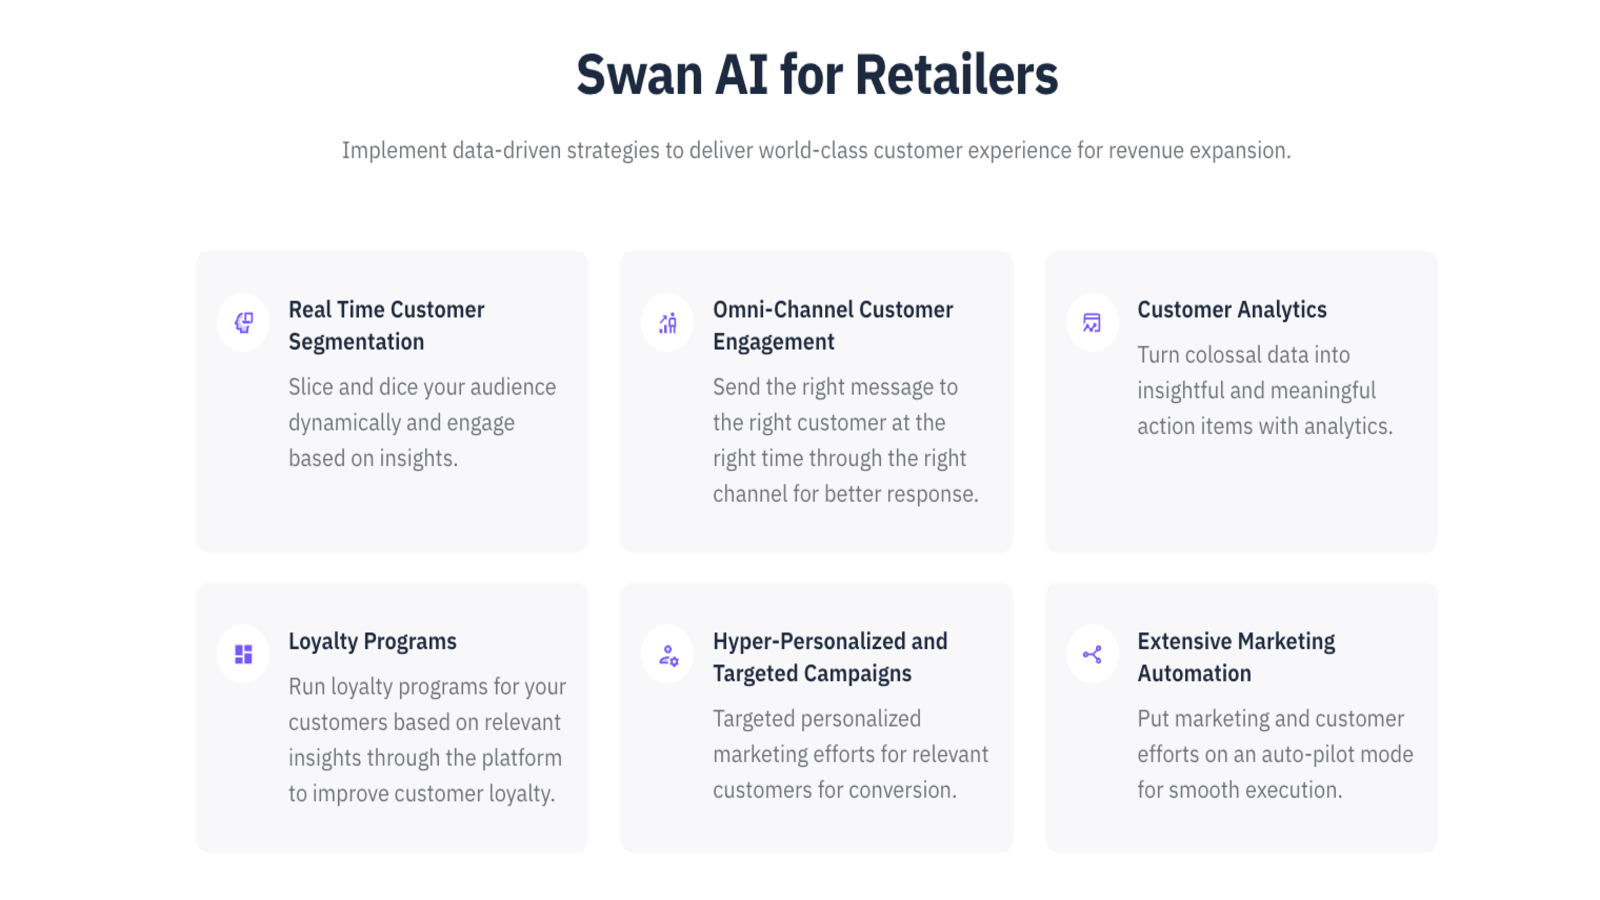 Get started with swan